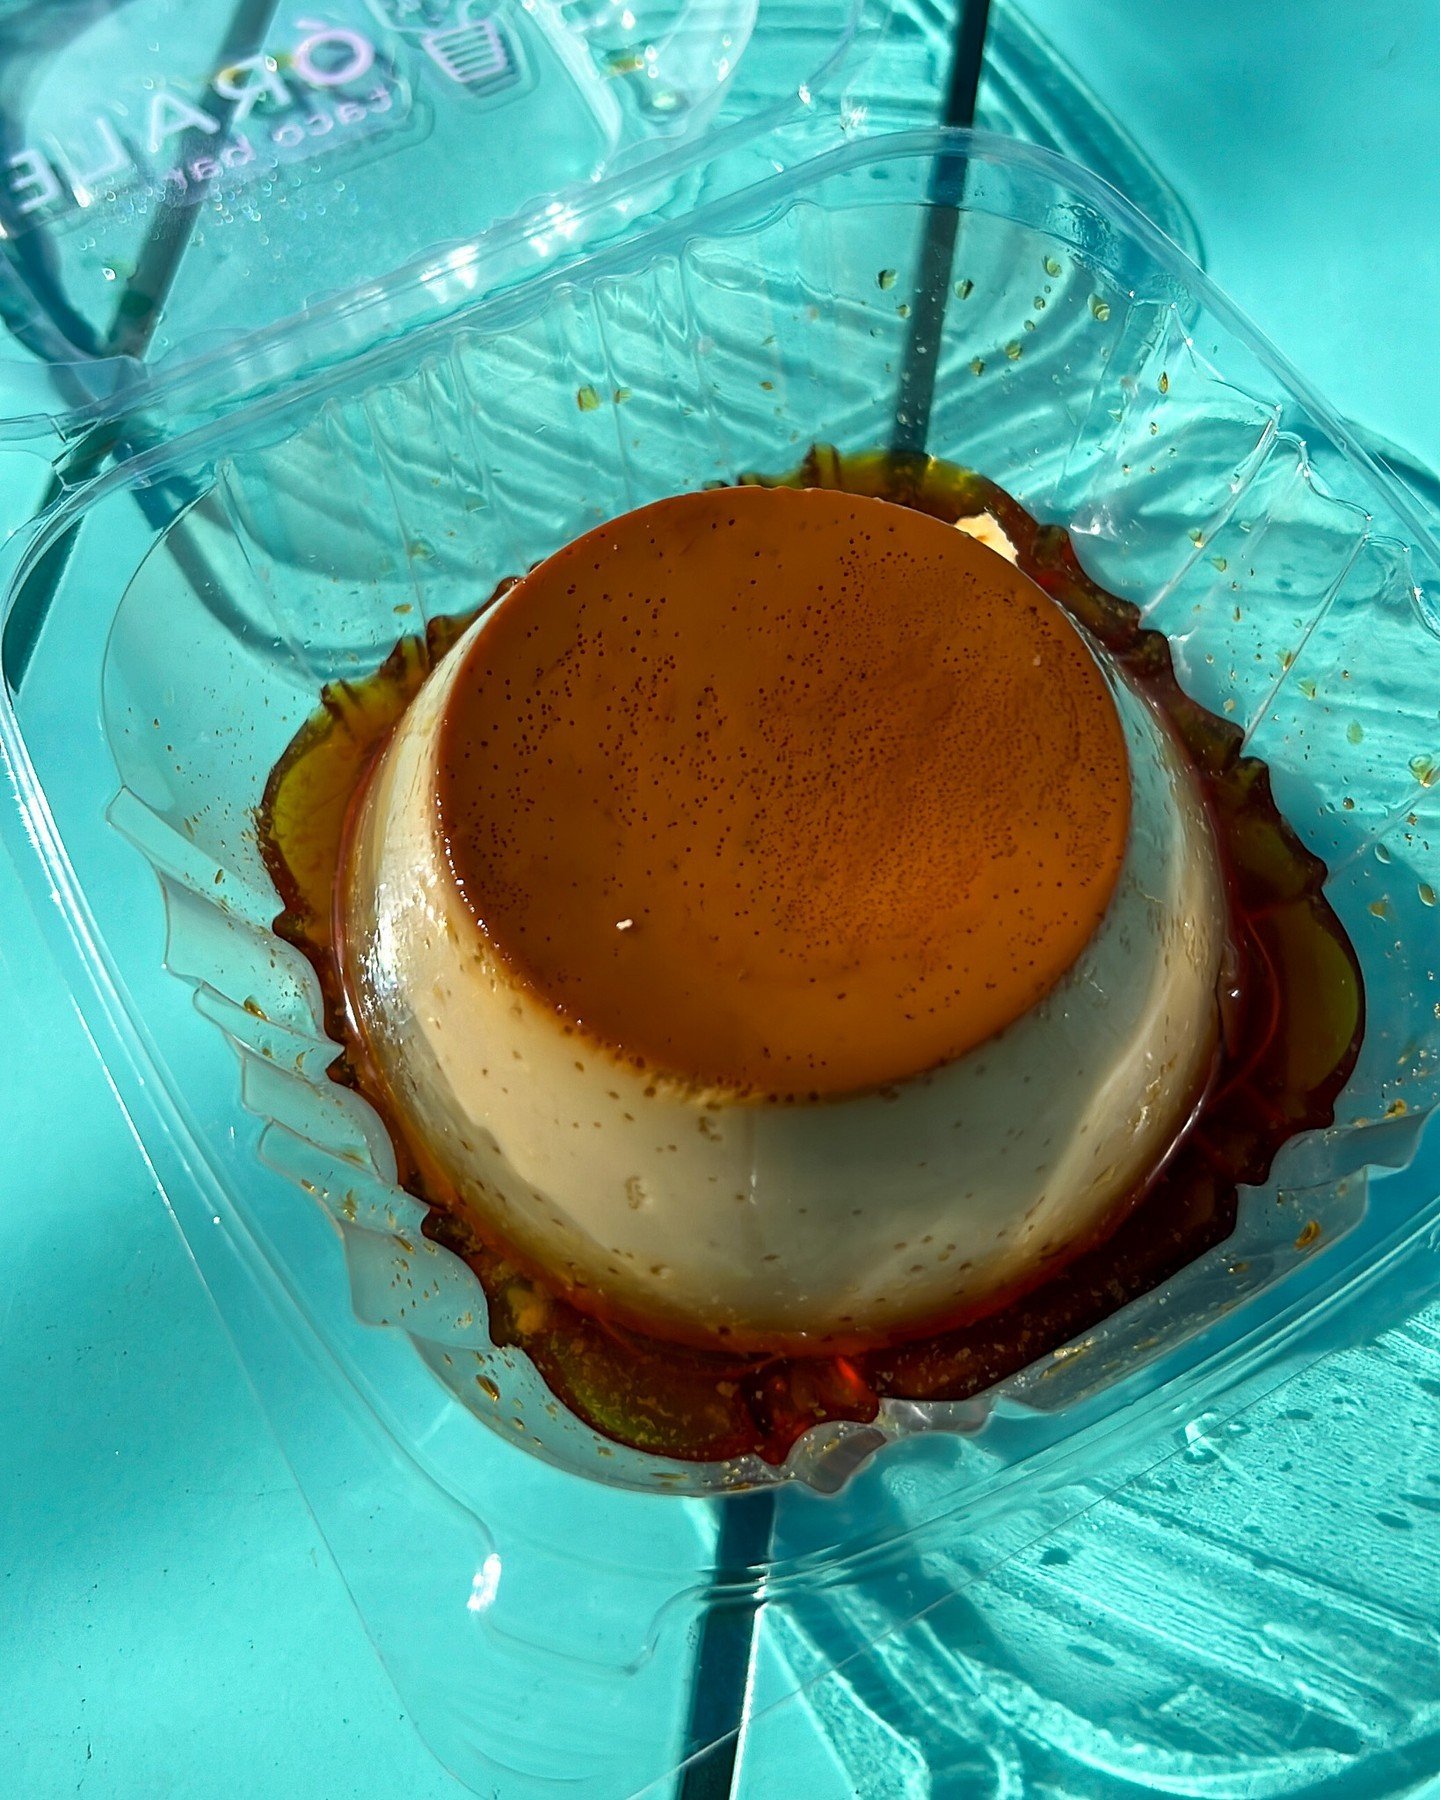 Life is sweeter when you have flan 🍮😋

#oraletacobar #taqueria #southernpines #mexicanfood #comidamexicana #southernpinesfood #southernpinesnc